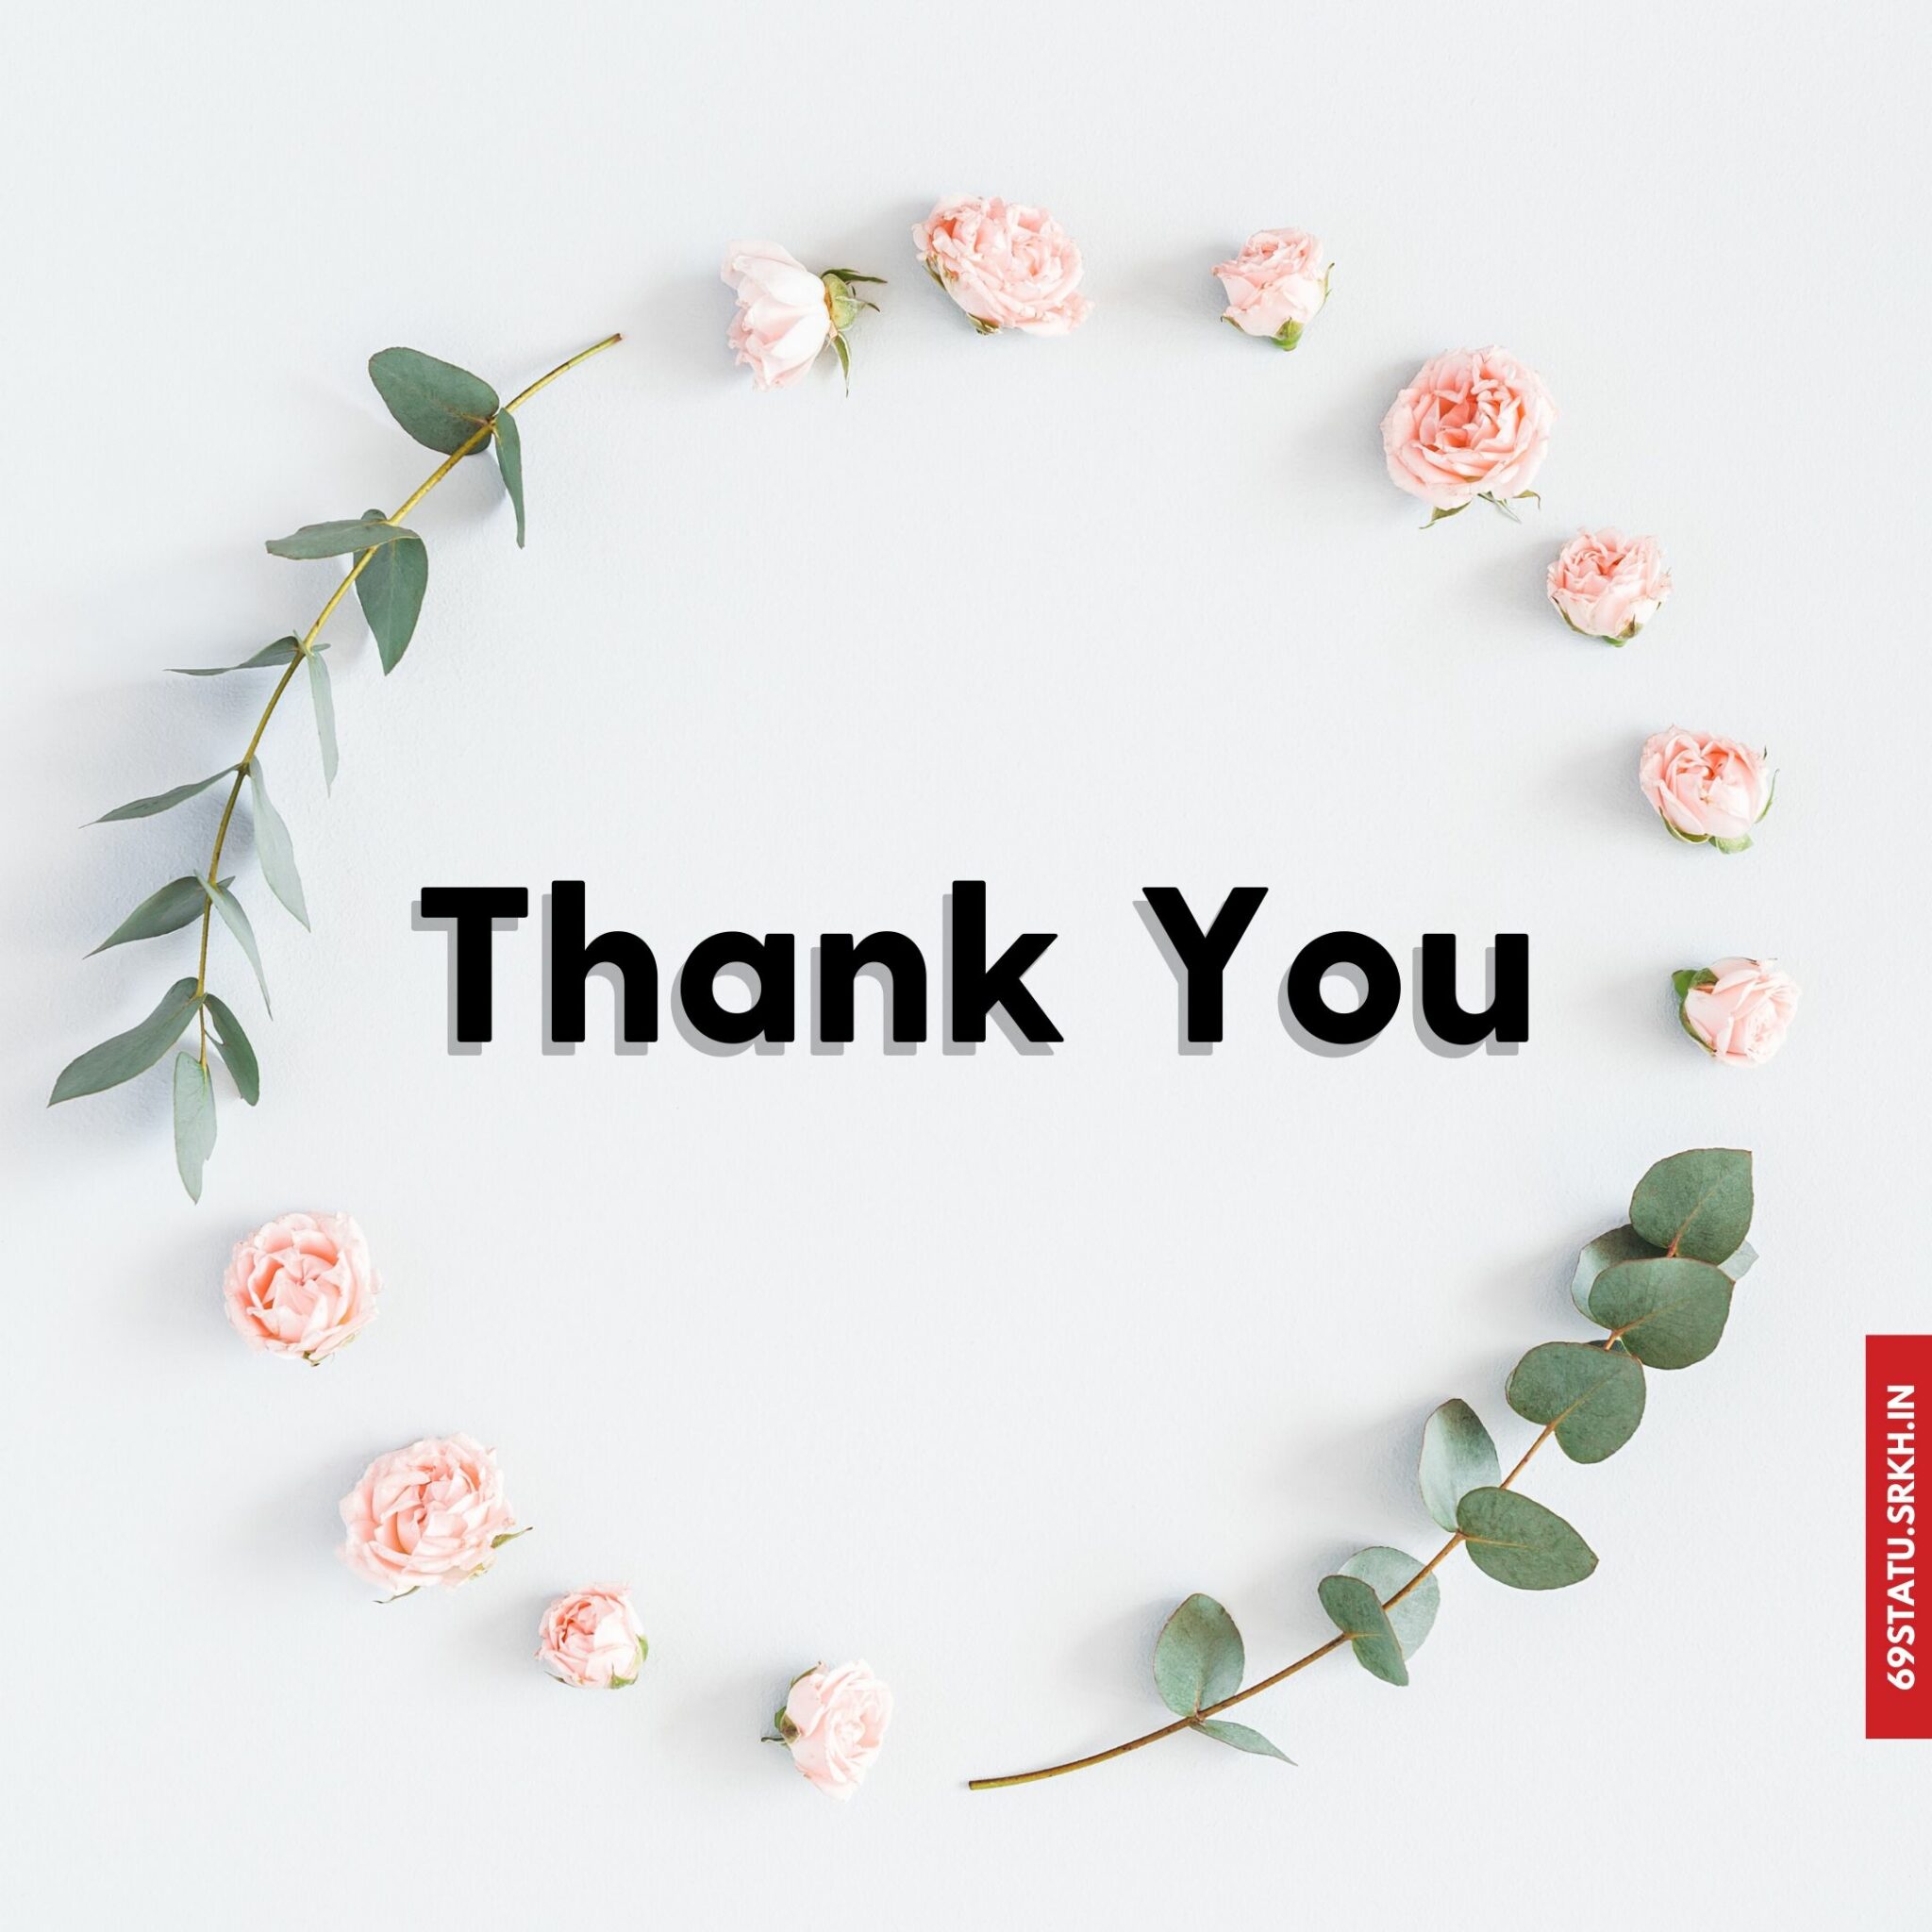 Thank You Images with Roses